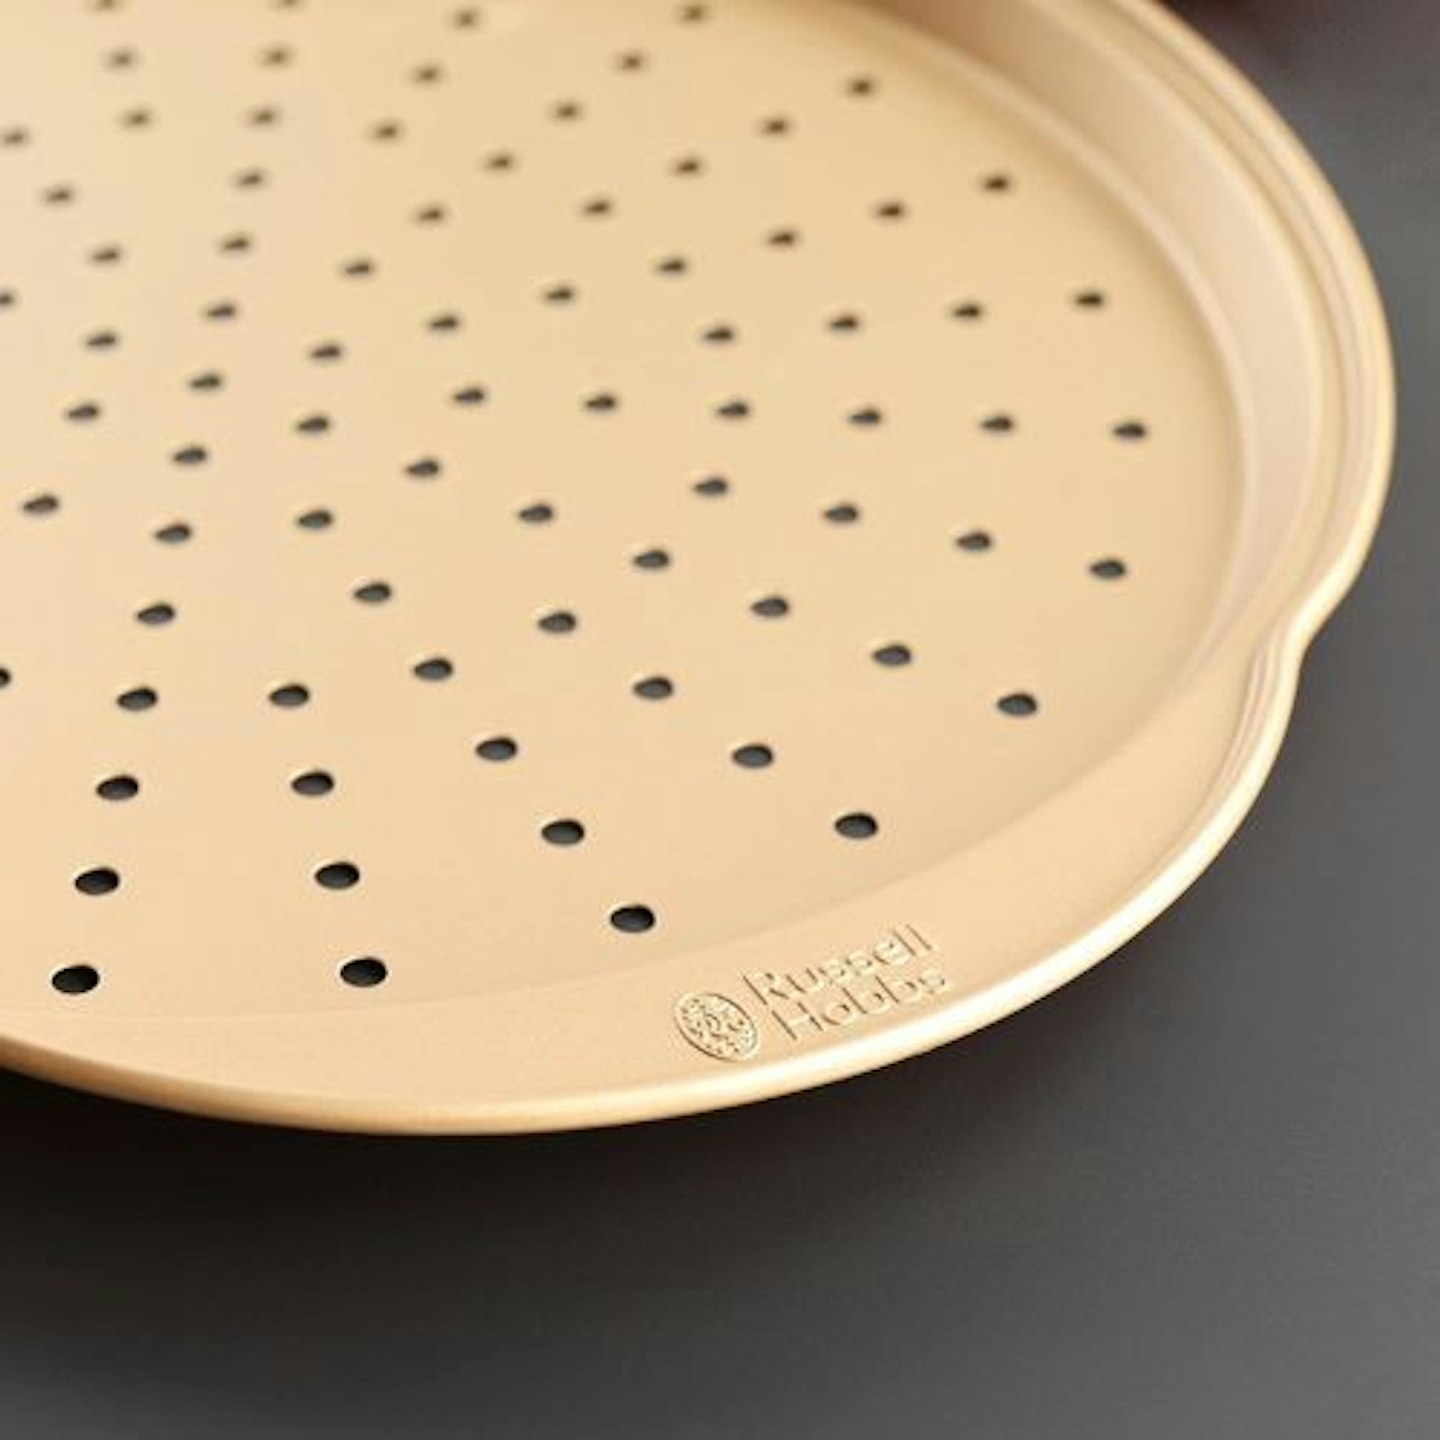 Russell Hobbs RH02338GEU7 Pizza Tray – Non-Stick Round Oven Pan, Carbon Steel Perforated